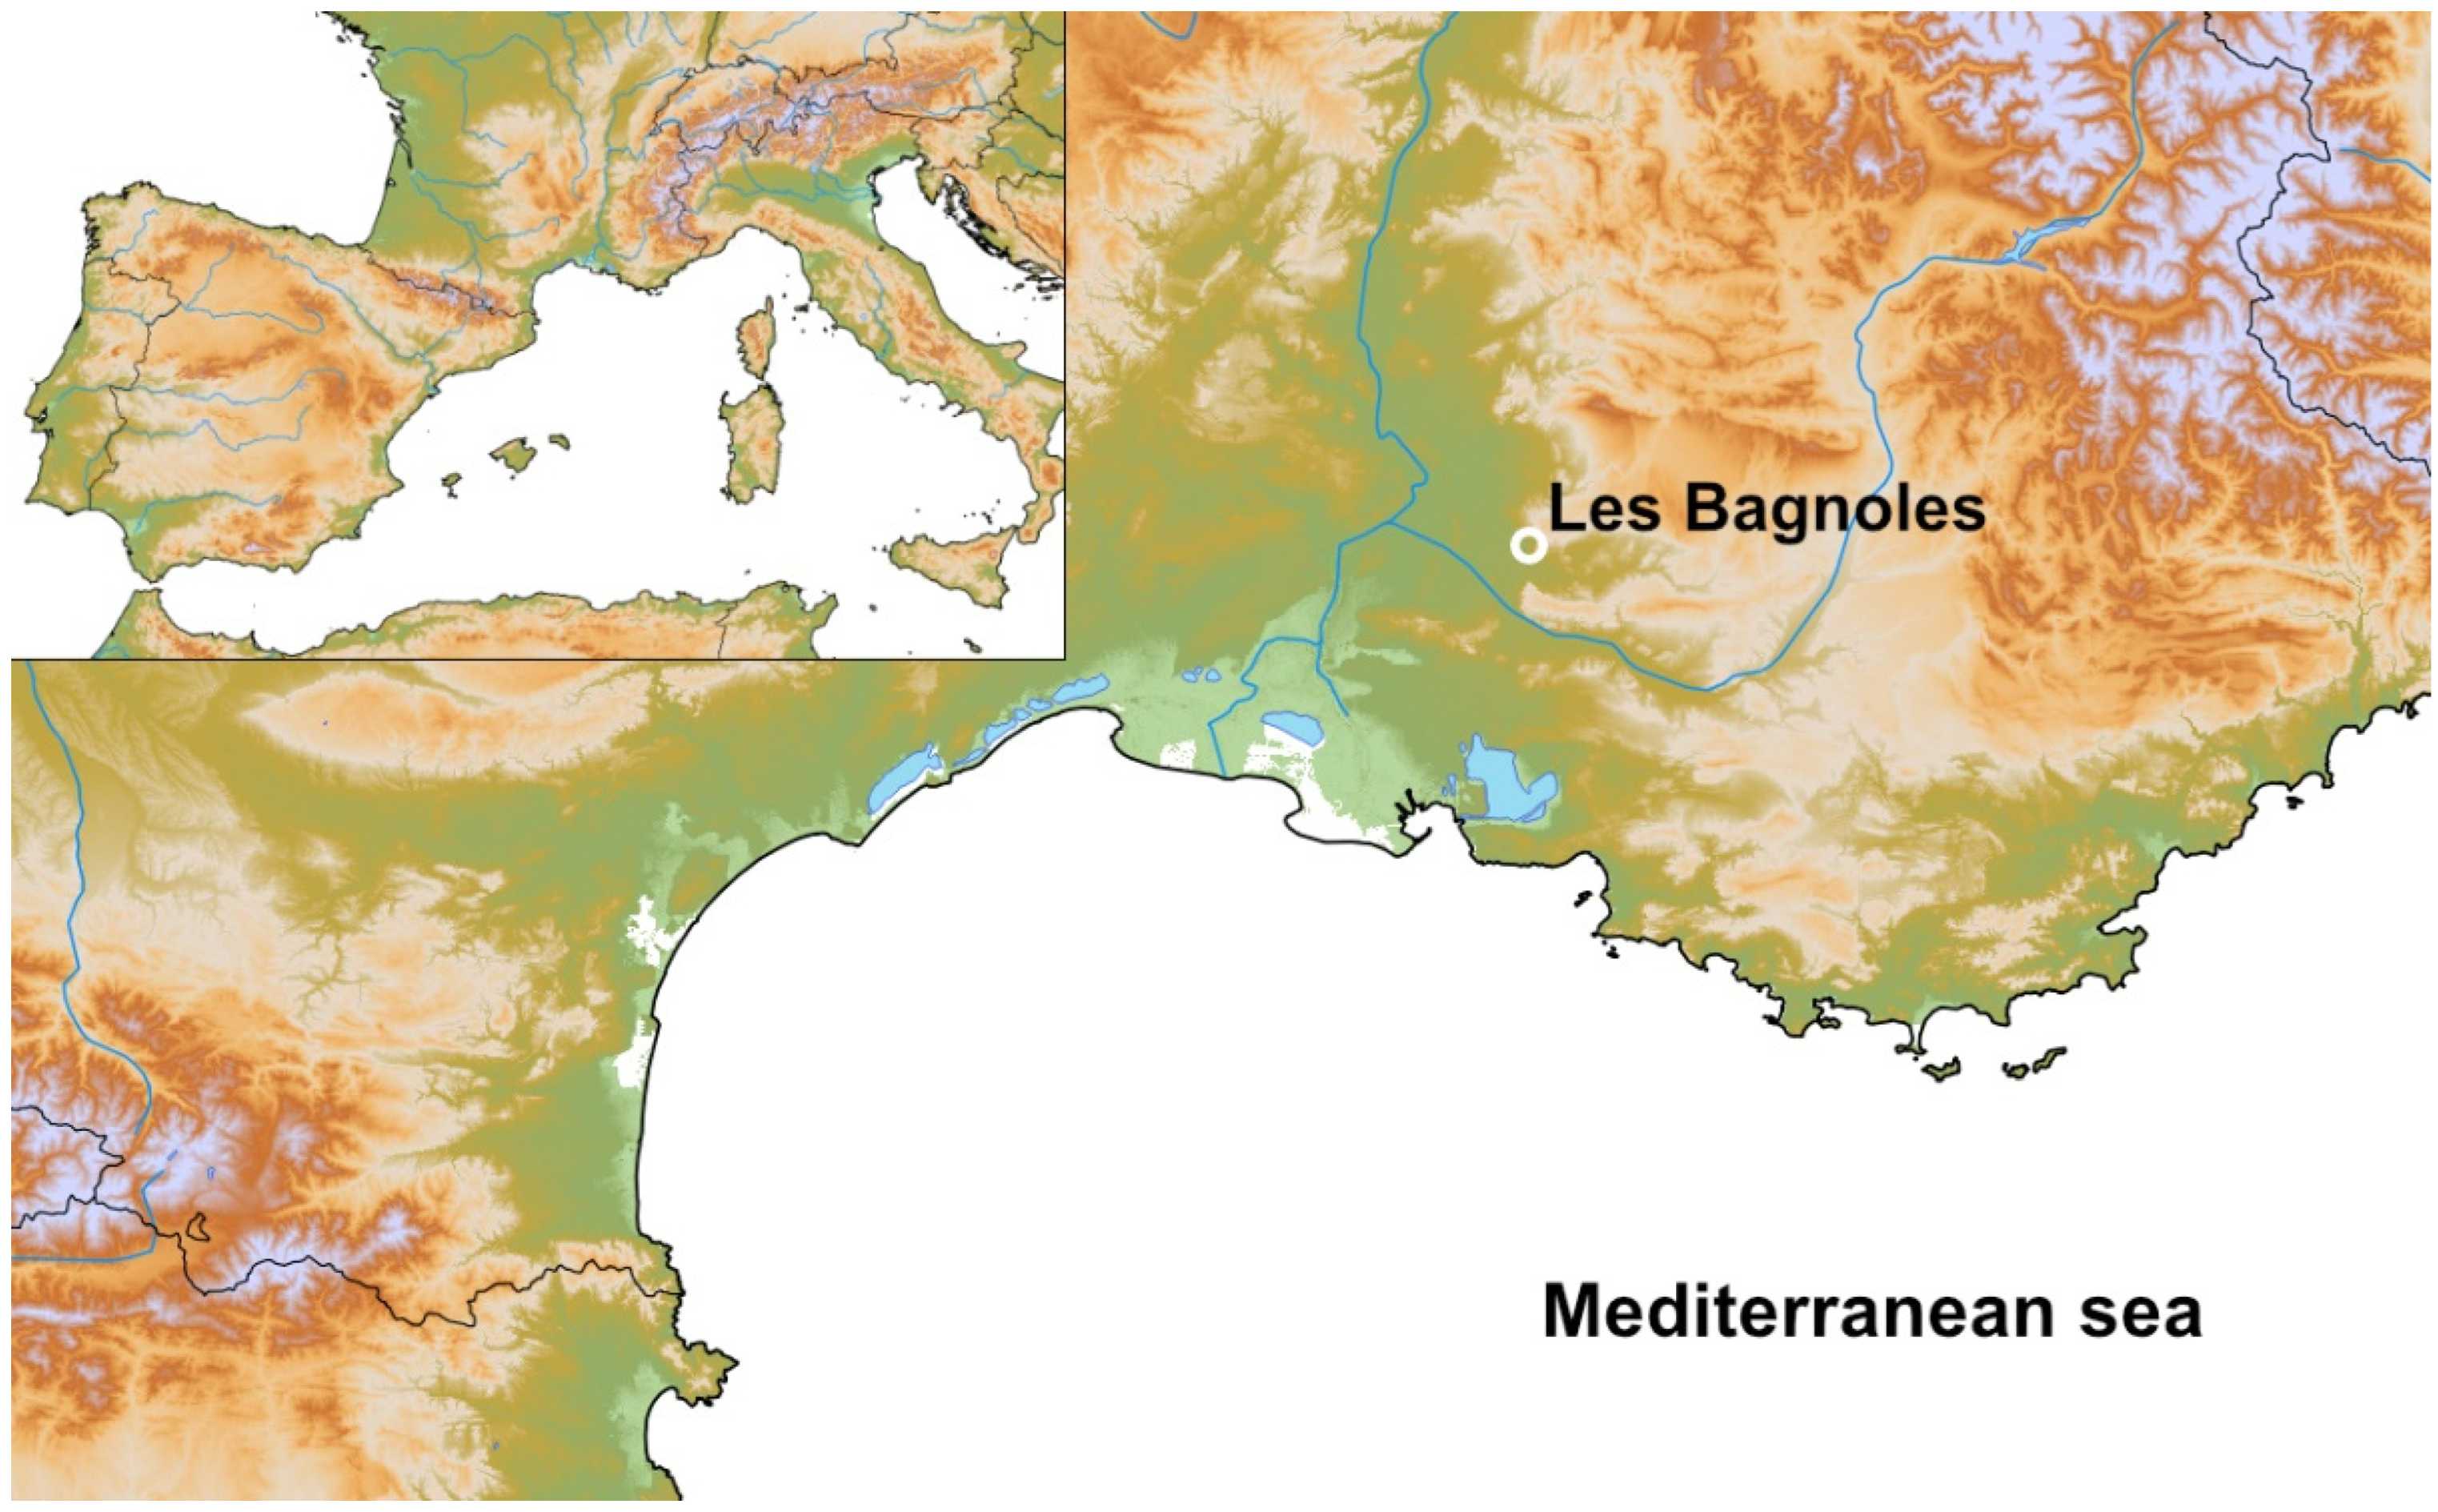 Animals | Free Full-Text | Small Animals, Big Impact? Early Farmers and  Pre- and Post-Harvest Pests from the Middle Neolithic Site of Les Bagnoles  in the South-East of France (L’Isle-sur-la-Sorgue, Vaucluse,  Provence-Alpes-Côte-d’Azur)